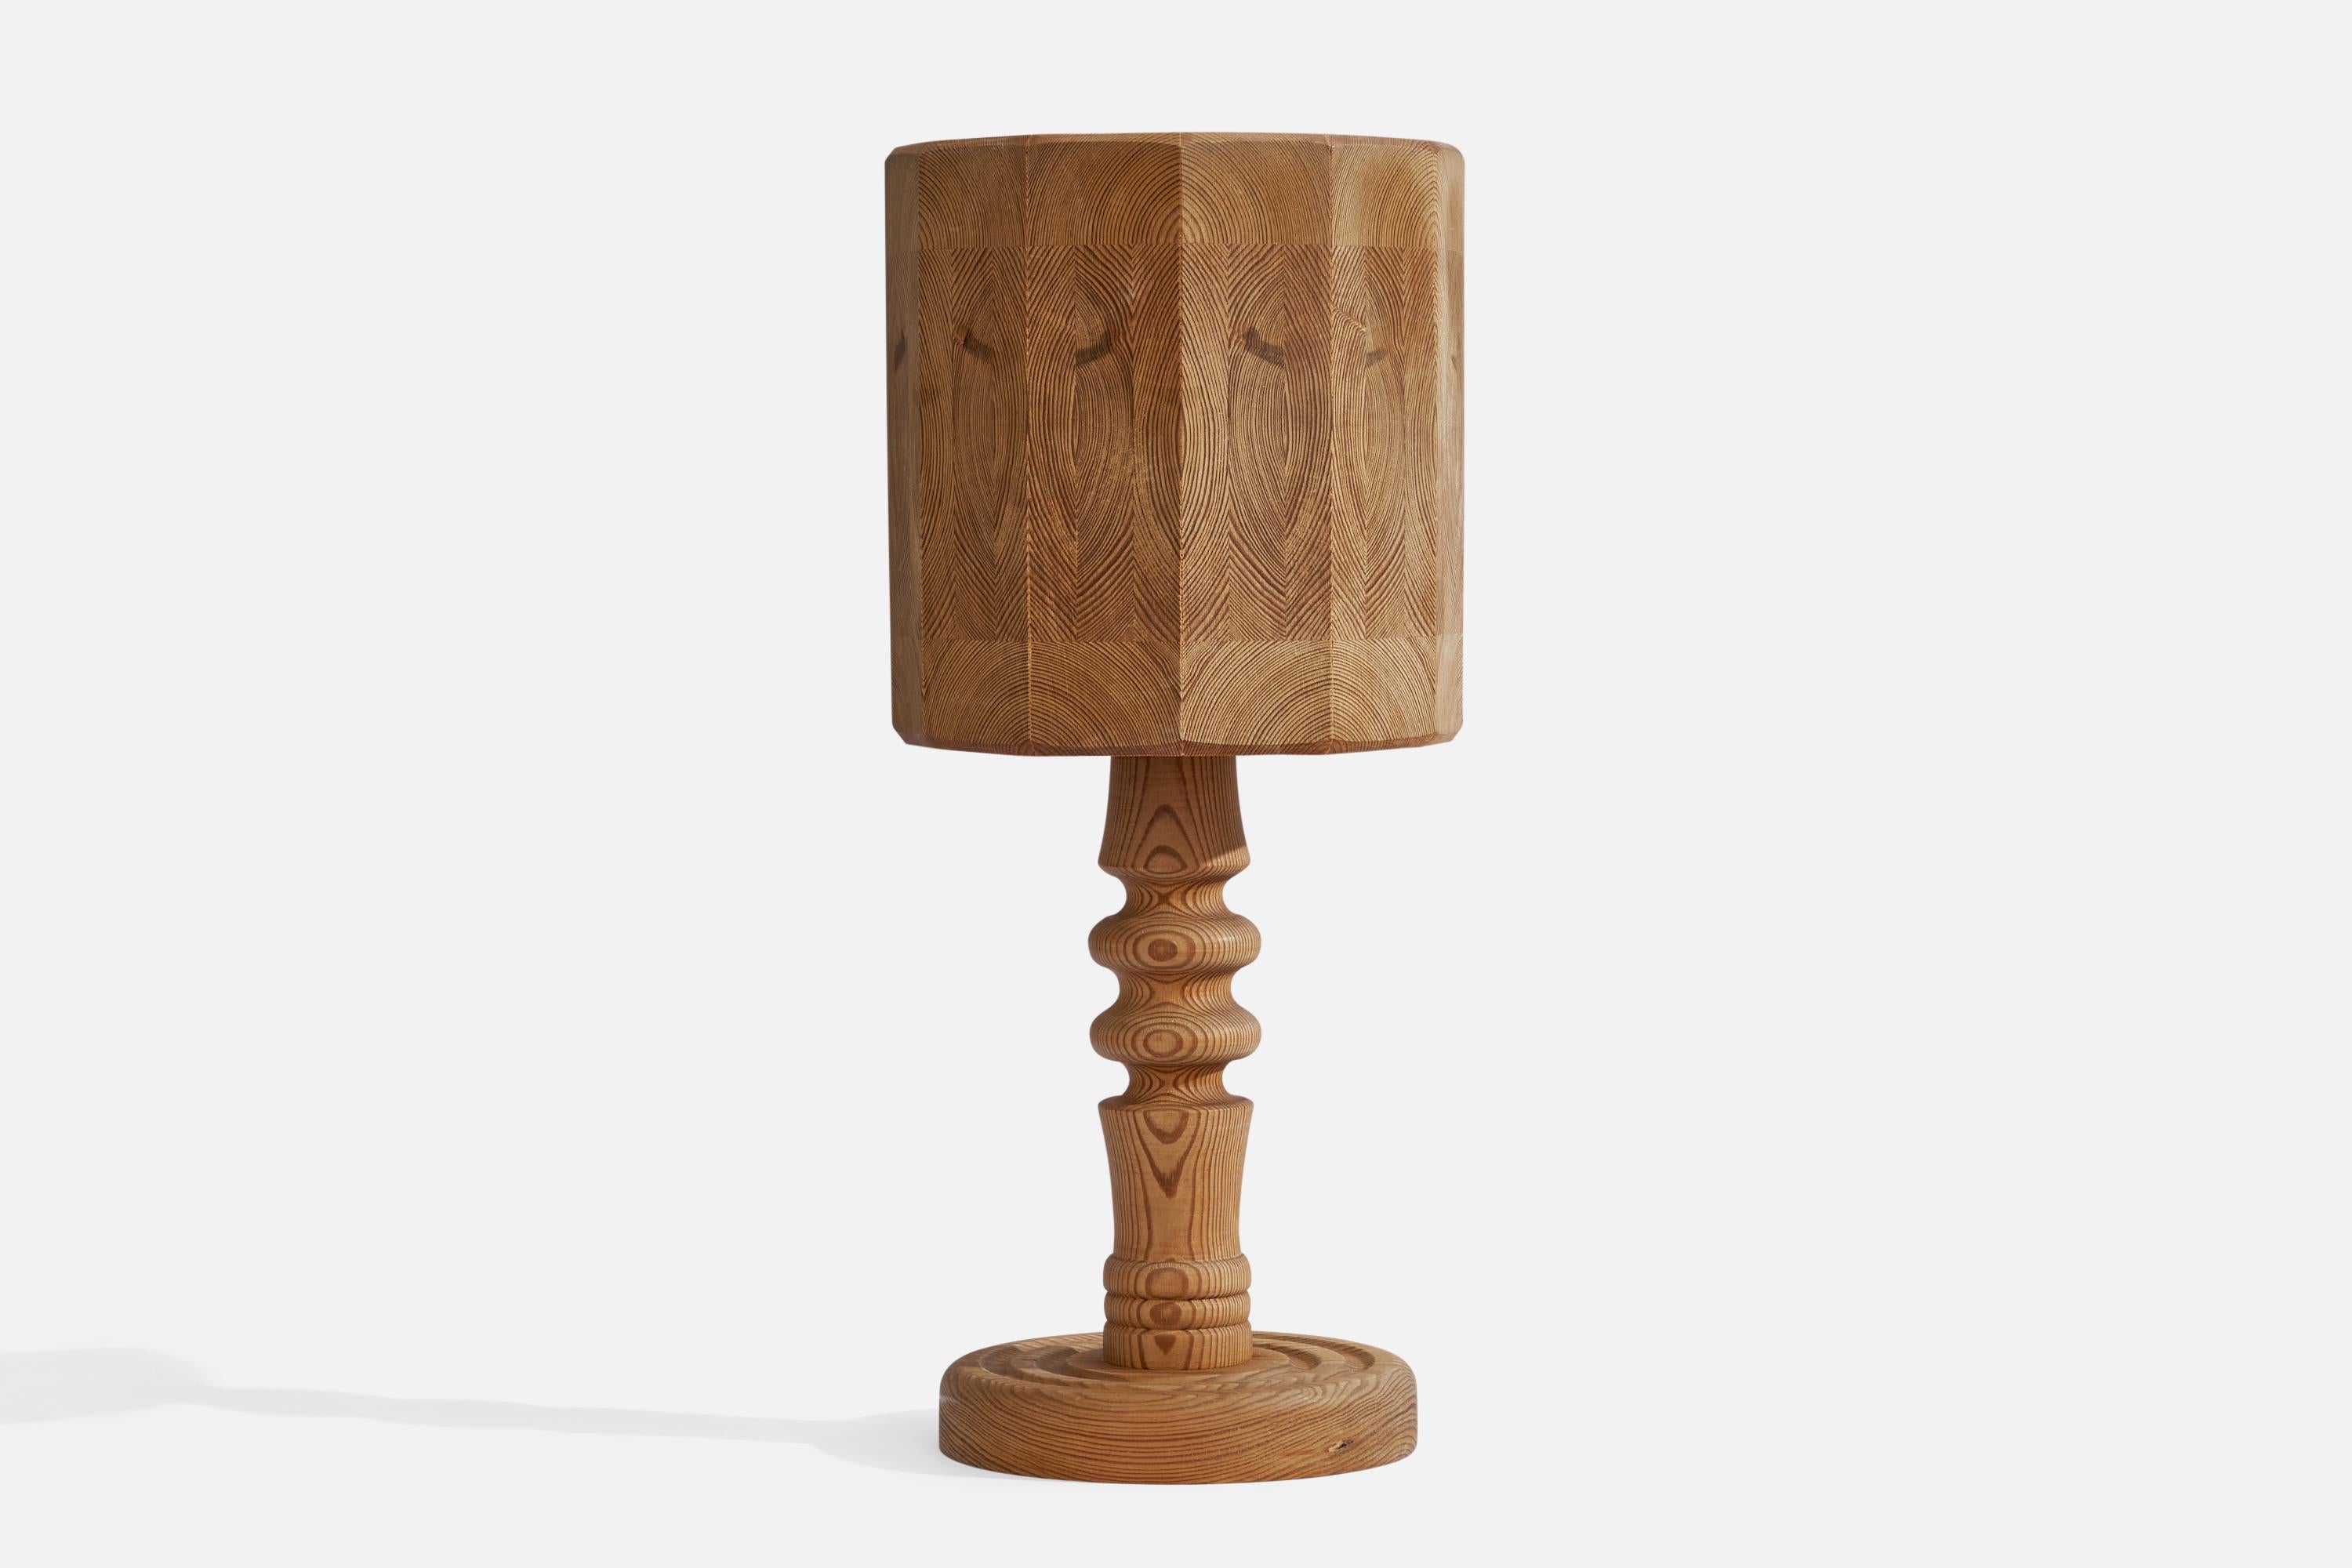 A pine table lamp designed and produced by Röjans Snickeri, Sweden, 1970s.

Overall Dimensions (inches): 19.25”  H x 8.25” D
Stated dimensions include shade.
Bulb Specifications: E-26 Bulb
Number of Sockets: 1
All lighting will be converted for US